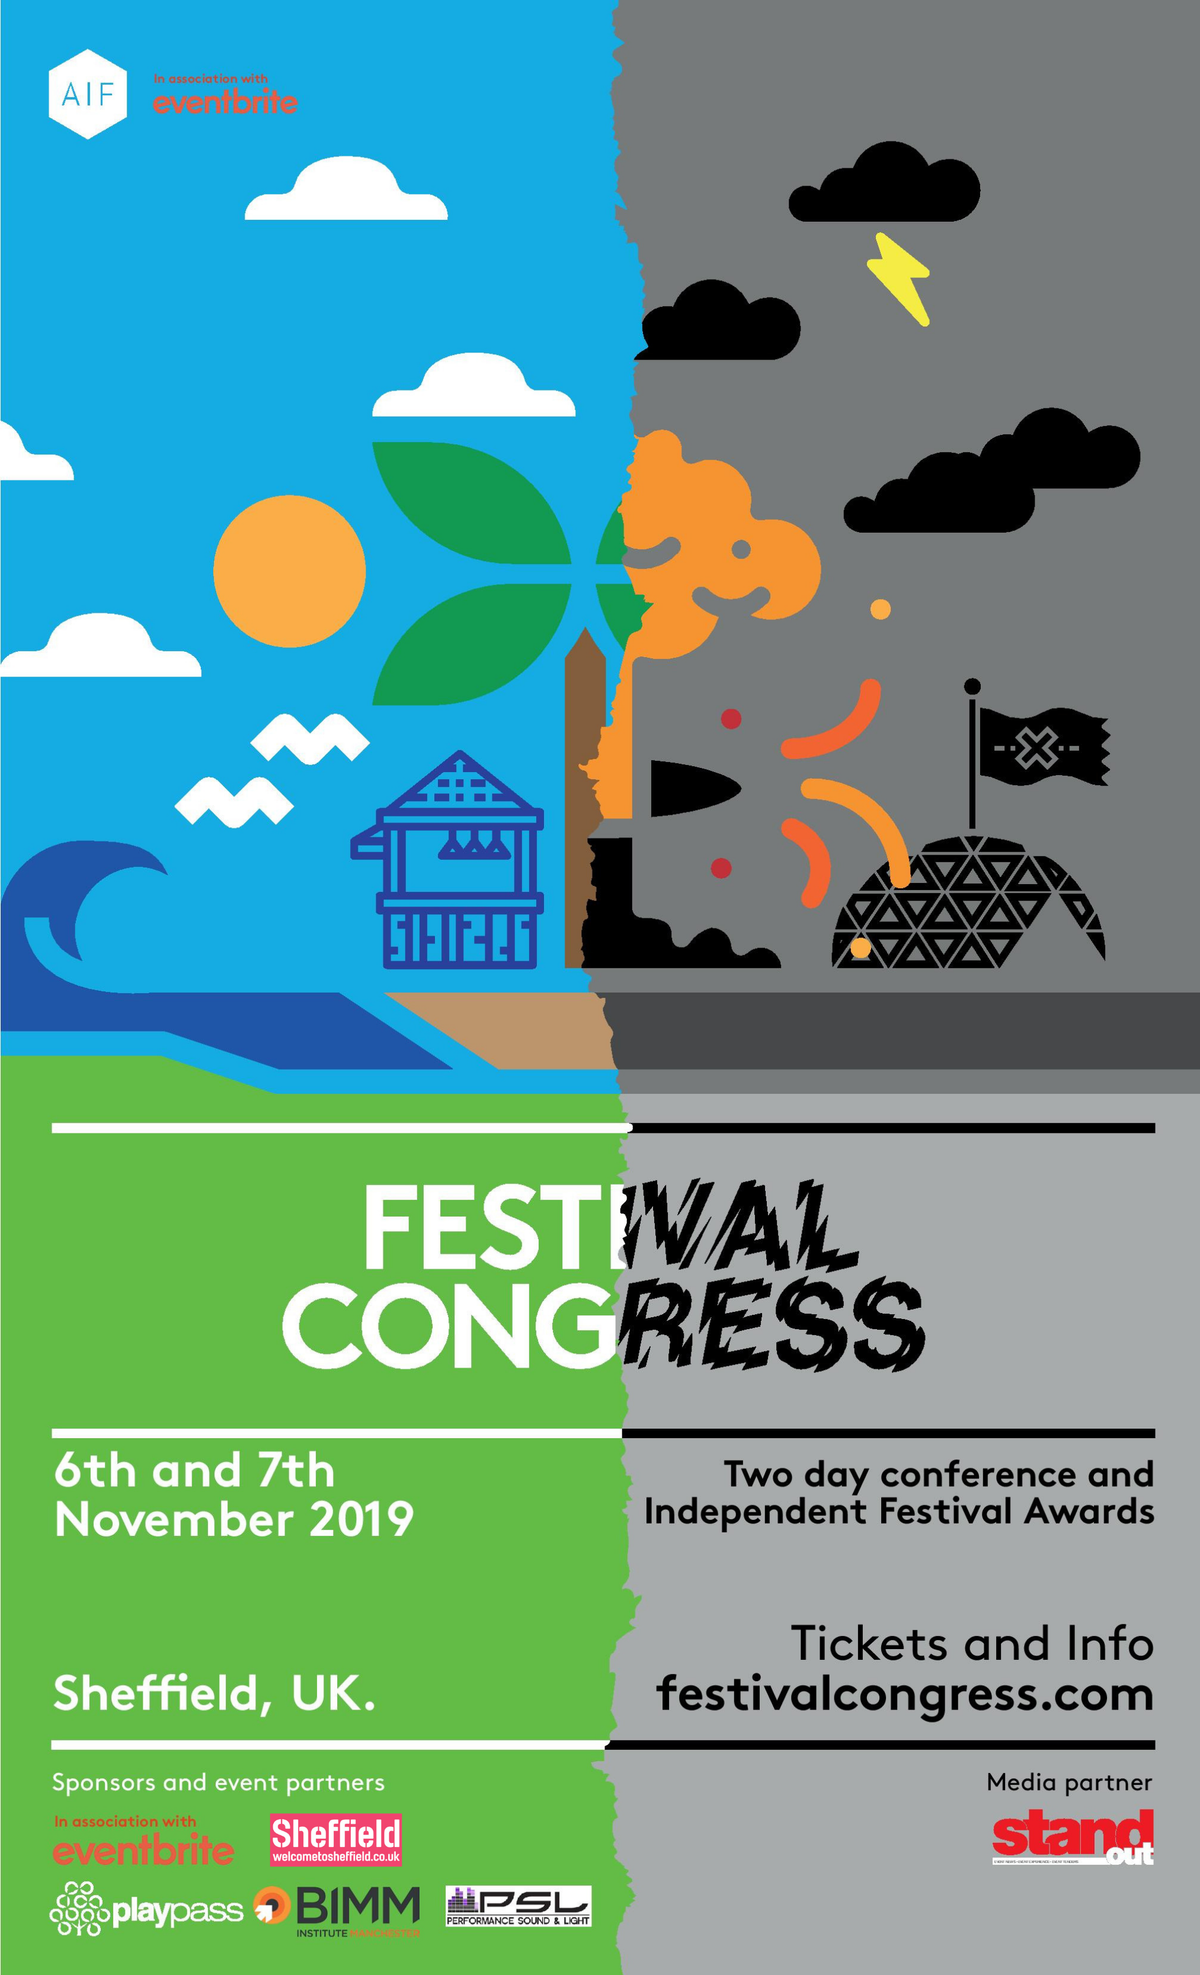 The first speakers for AIF Festival congress 2019 have been announced!